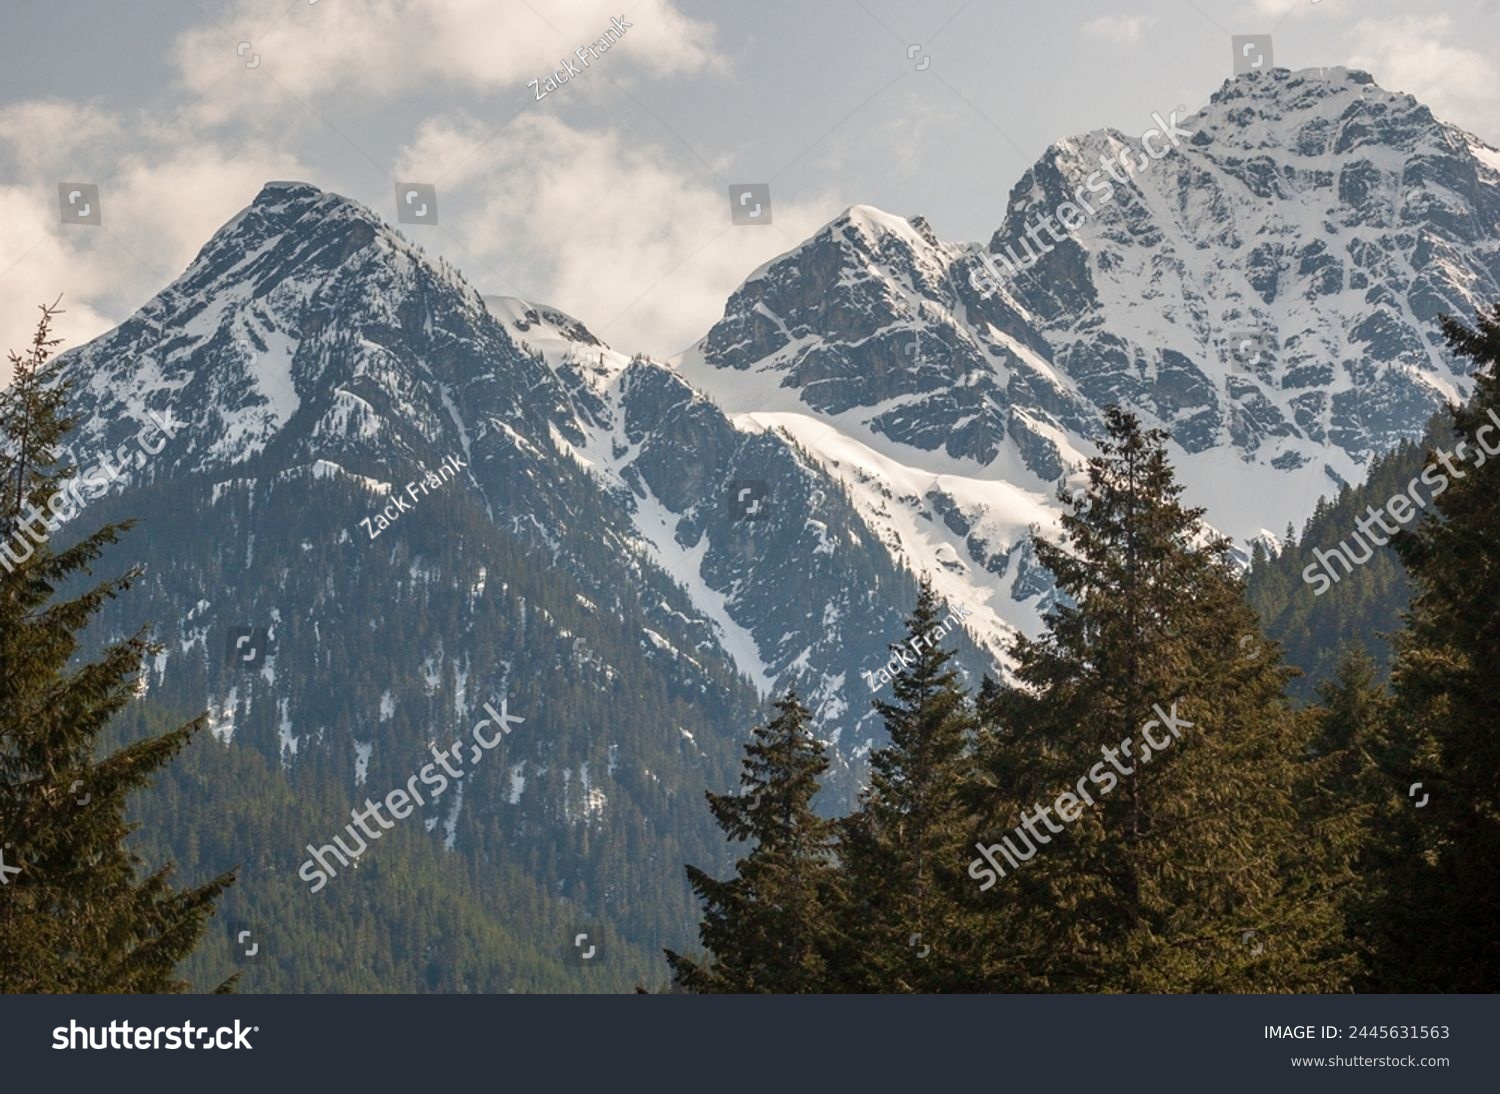 View of the Snow Covered Mountain Peaks and Forest at North Cascades National Park in Washington State, USA #2445631563